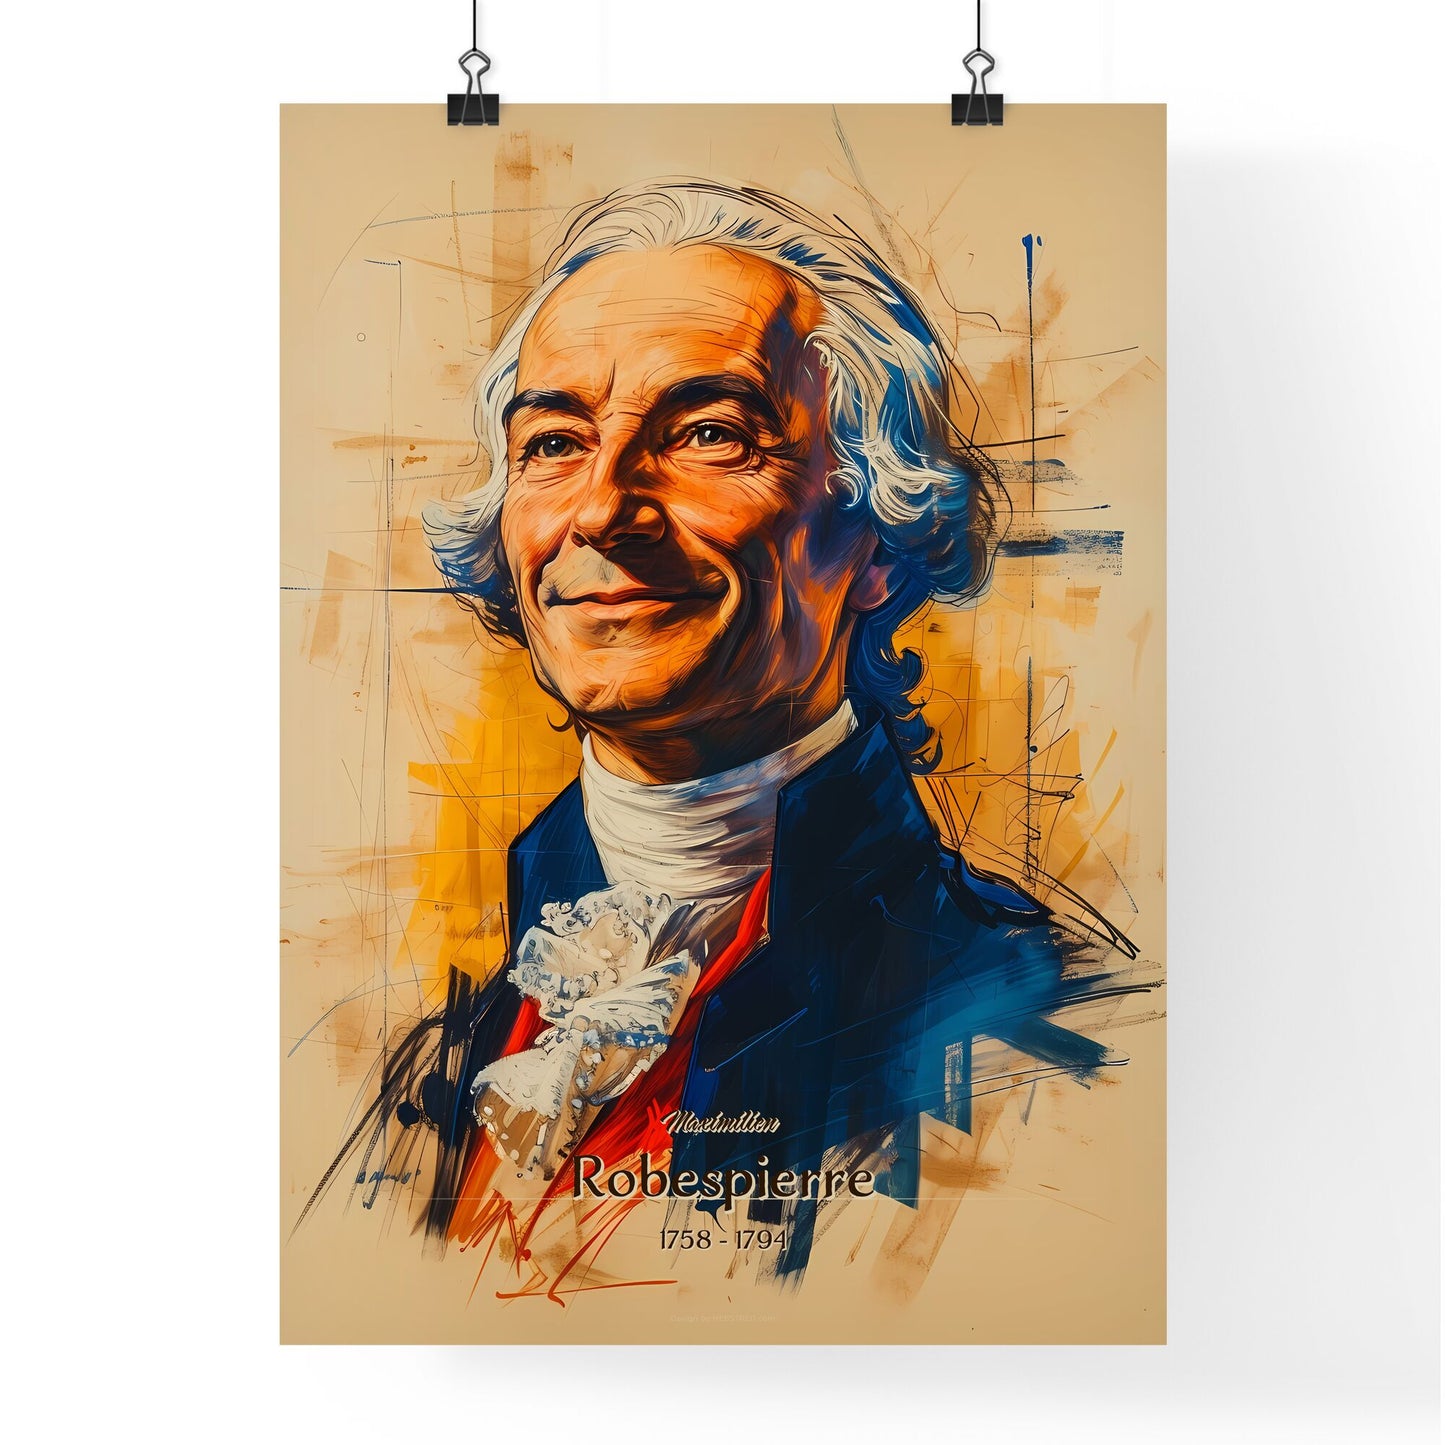 Maximilien, Robespierre, 1758 - 1794, A Poster of a painting of a man Default Title